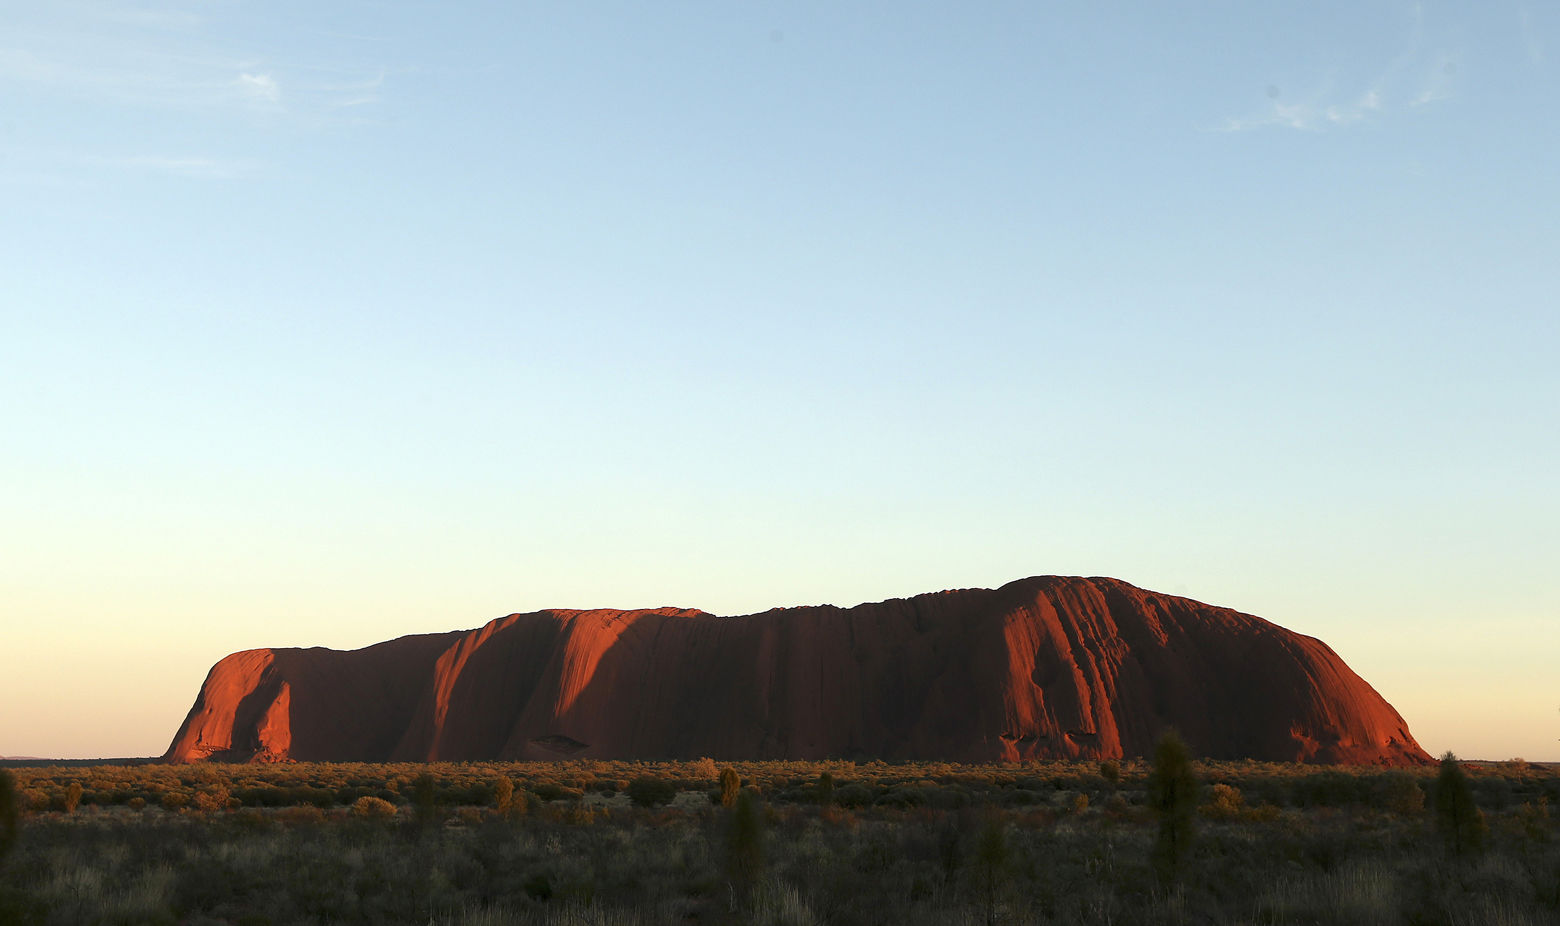 The sun rises over Uluru, Australia, Tuesday, April 22, 2014.  The Duke and Duchess of Cambridge will visit Uluru Tuesday during their three-week tour of Australia and New Zealand, the first official trip overseas with their son, Prince George. (AP Photo/Rob Griffith)